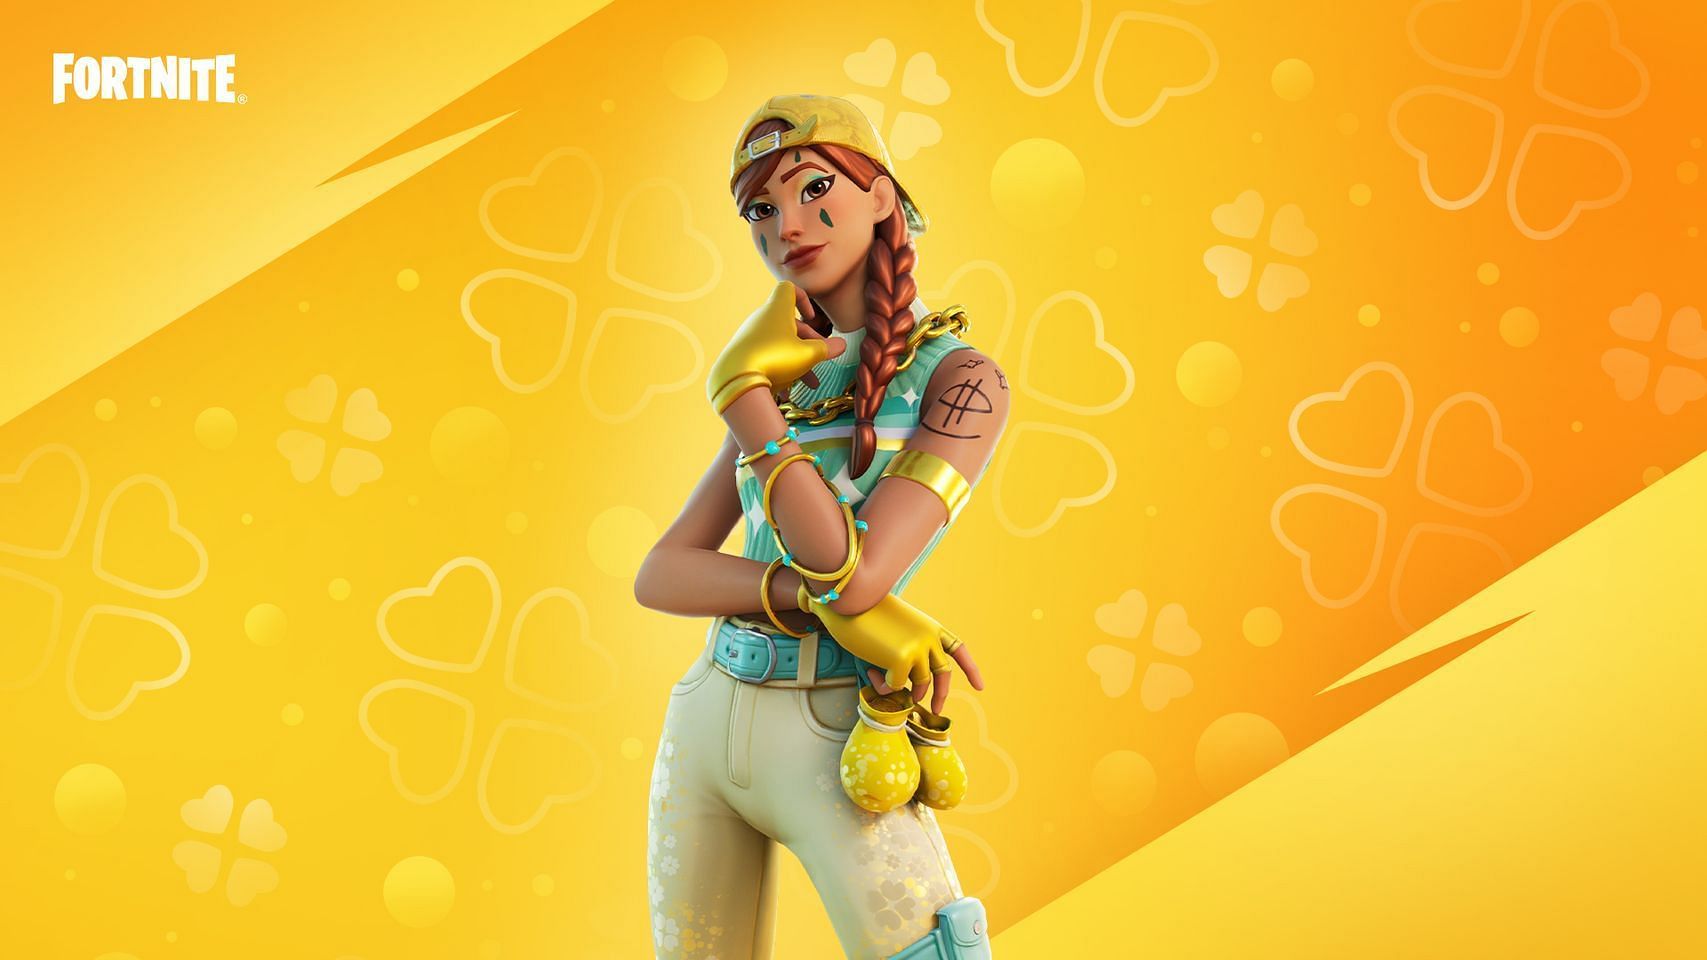 Aura may be the sweatiest Fortnite skin of all time (Image via Epic Games)